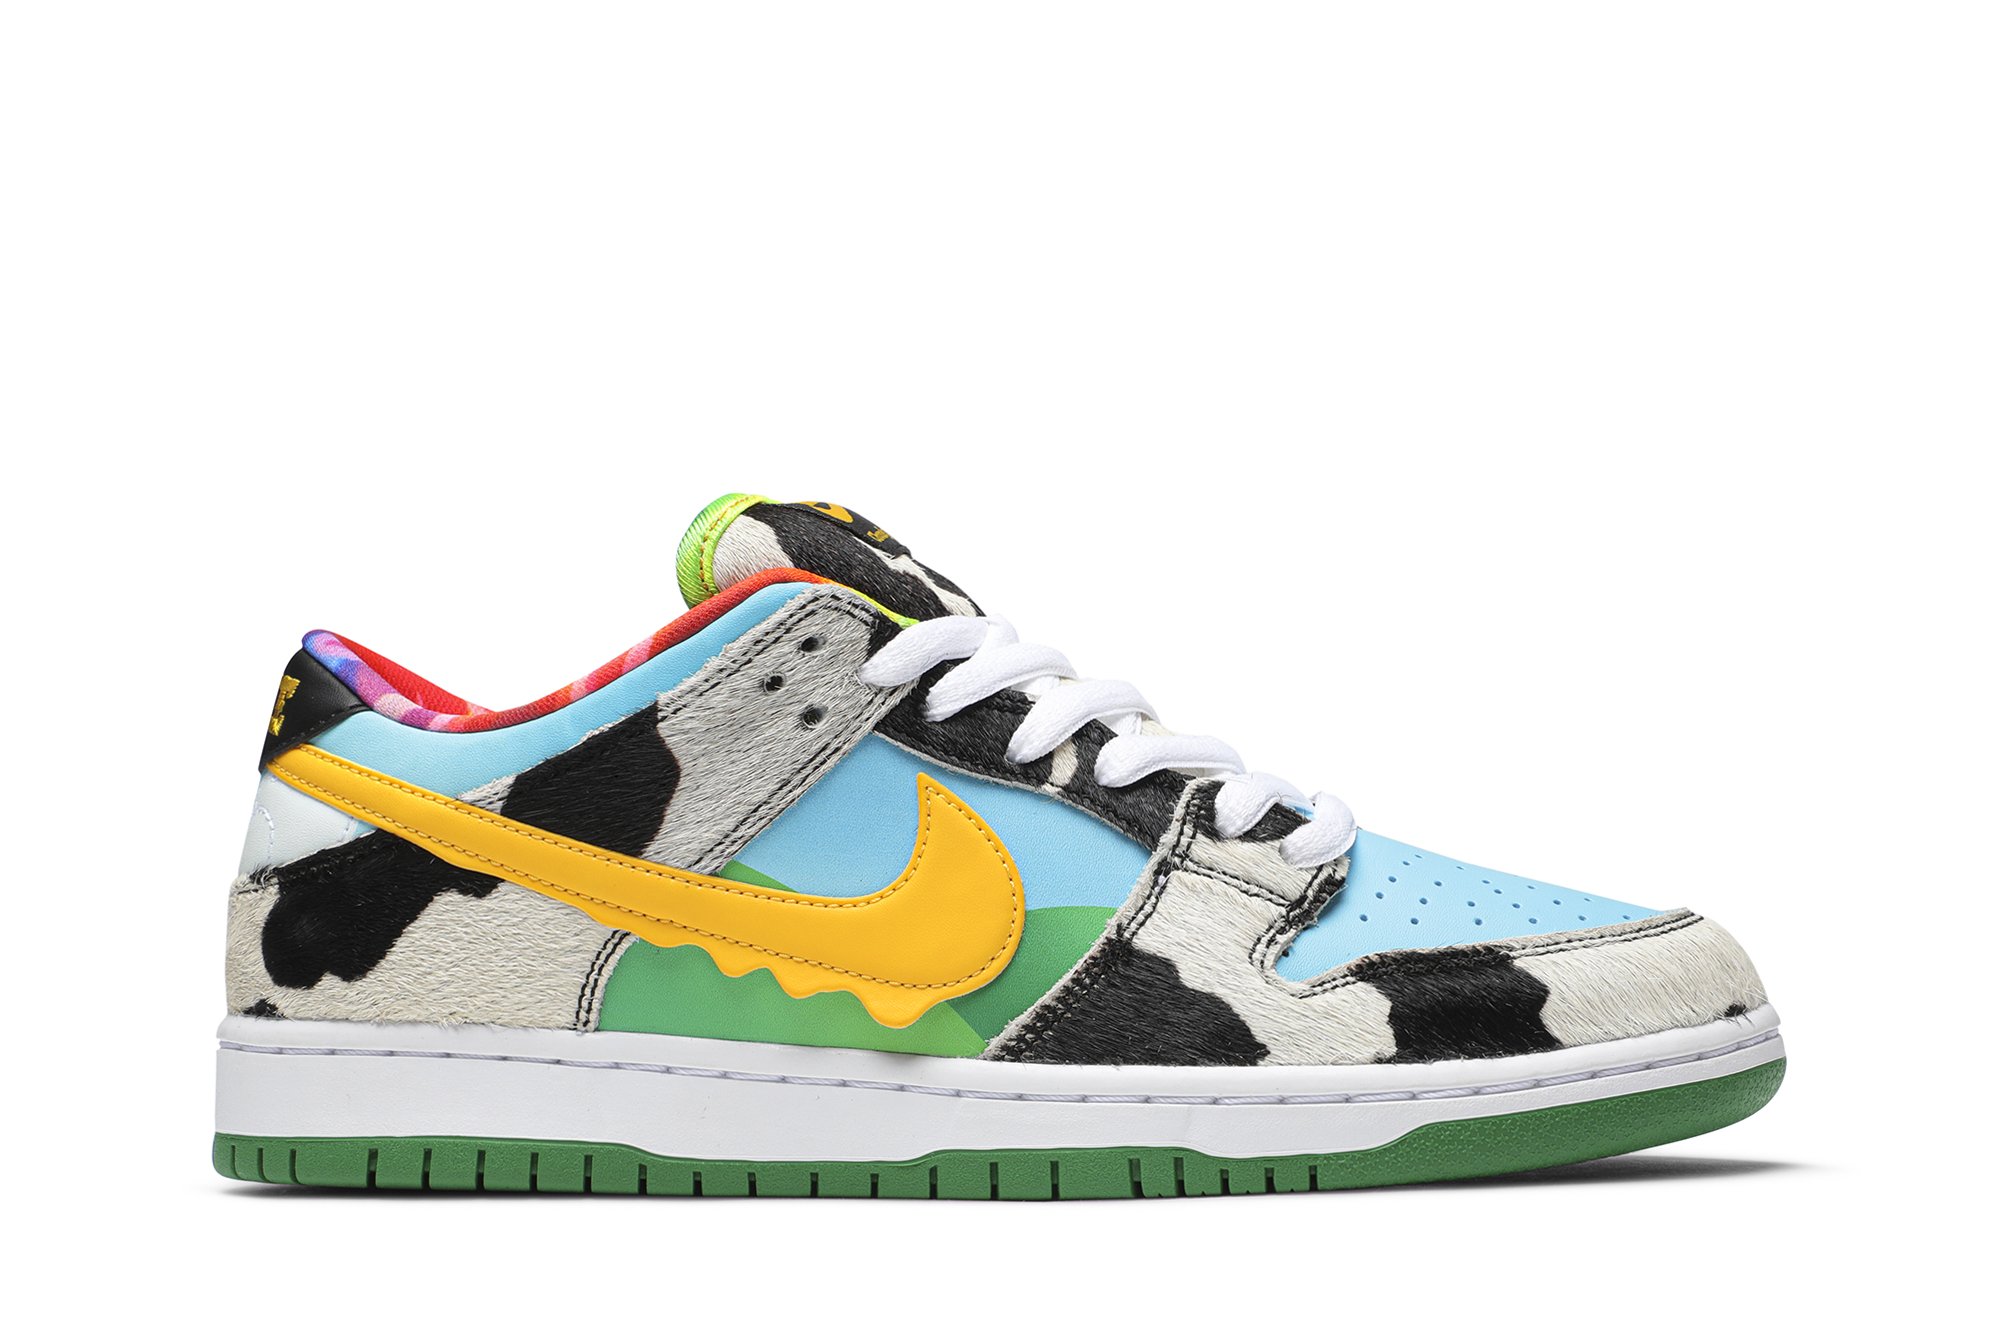 Ben & Jerry's x Dunk Low SB 'Chunky Dunky' | GOAT